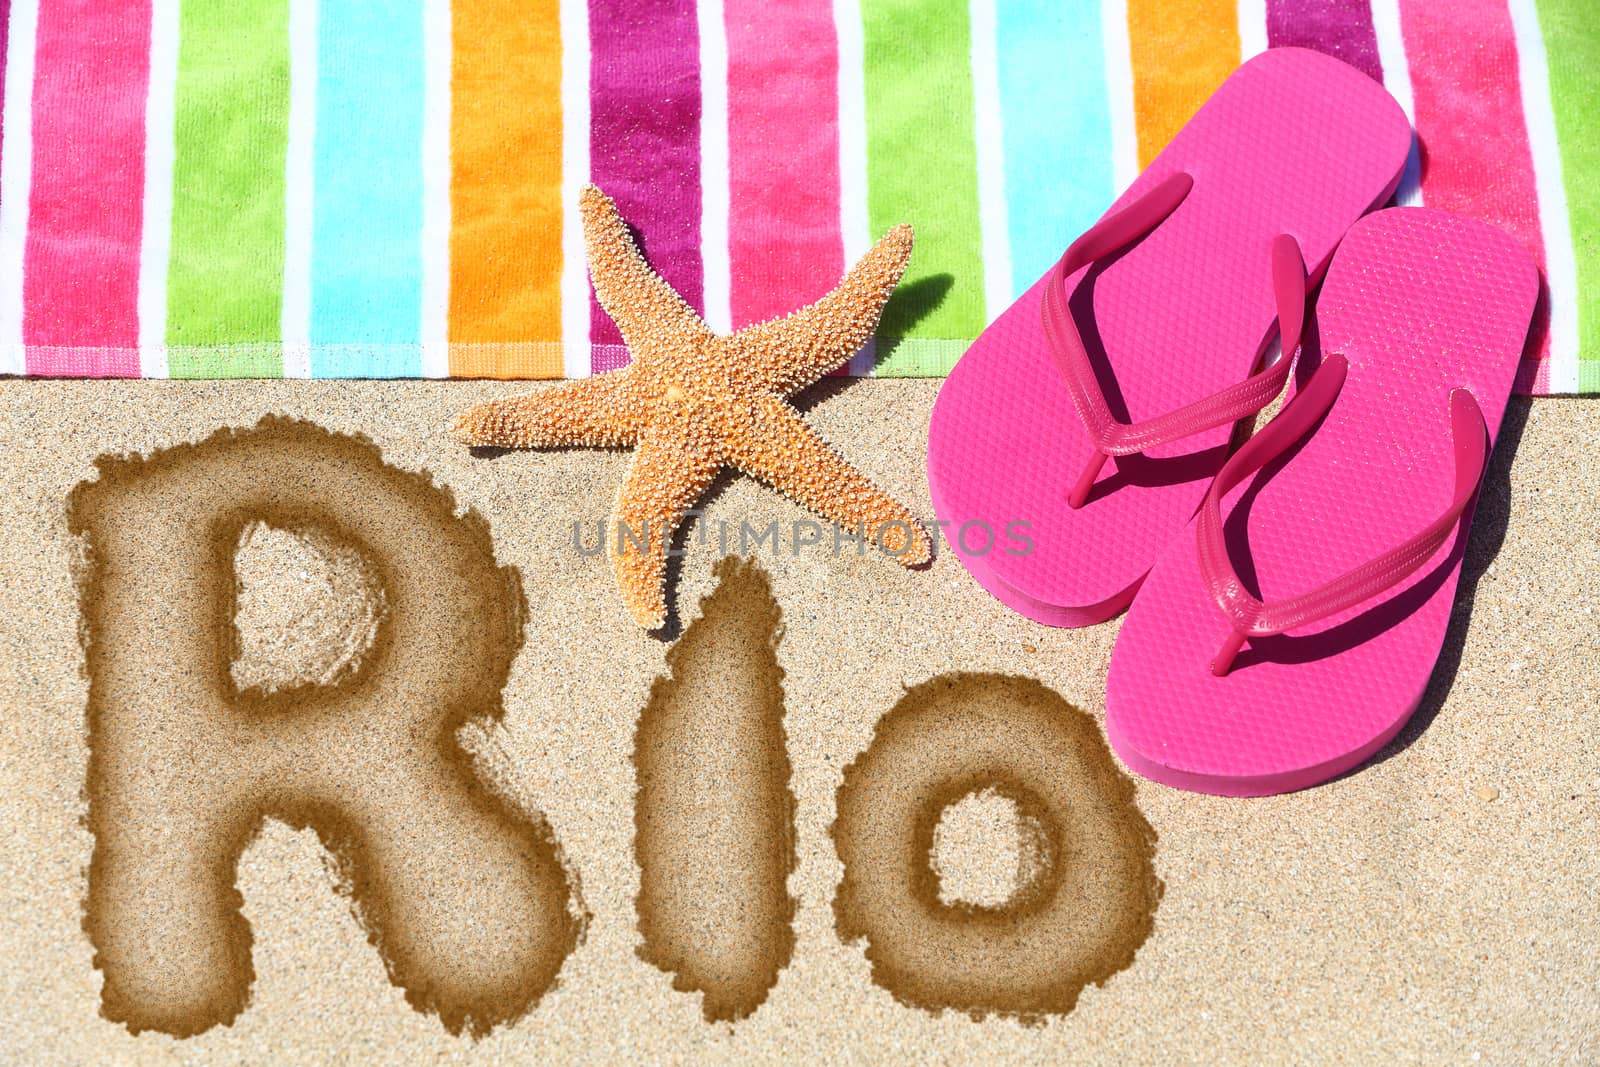 Rio. Overhead view ot the word RIO written on beach sand with a colorful striped towel, pink thongs and a starfish conceptual of a summer vacation and travel in Rio de Janiero, Brazil